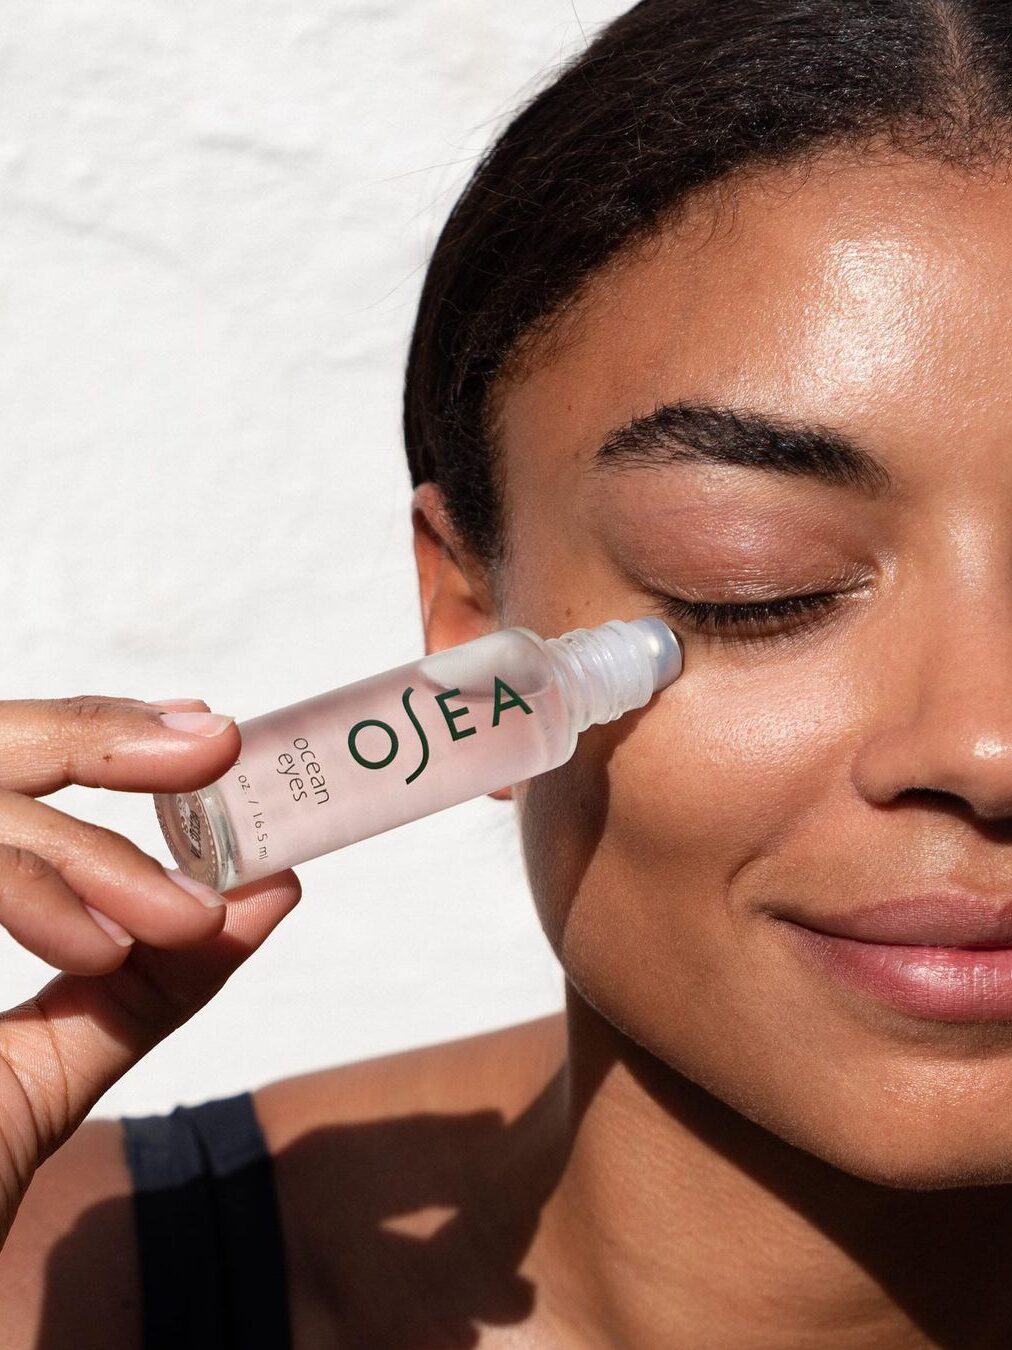 A close up of a woman applying Osea's Ocean Eyes serum to her under eye region with her eyes closed.